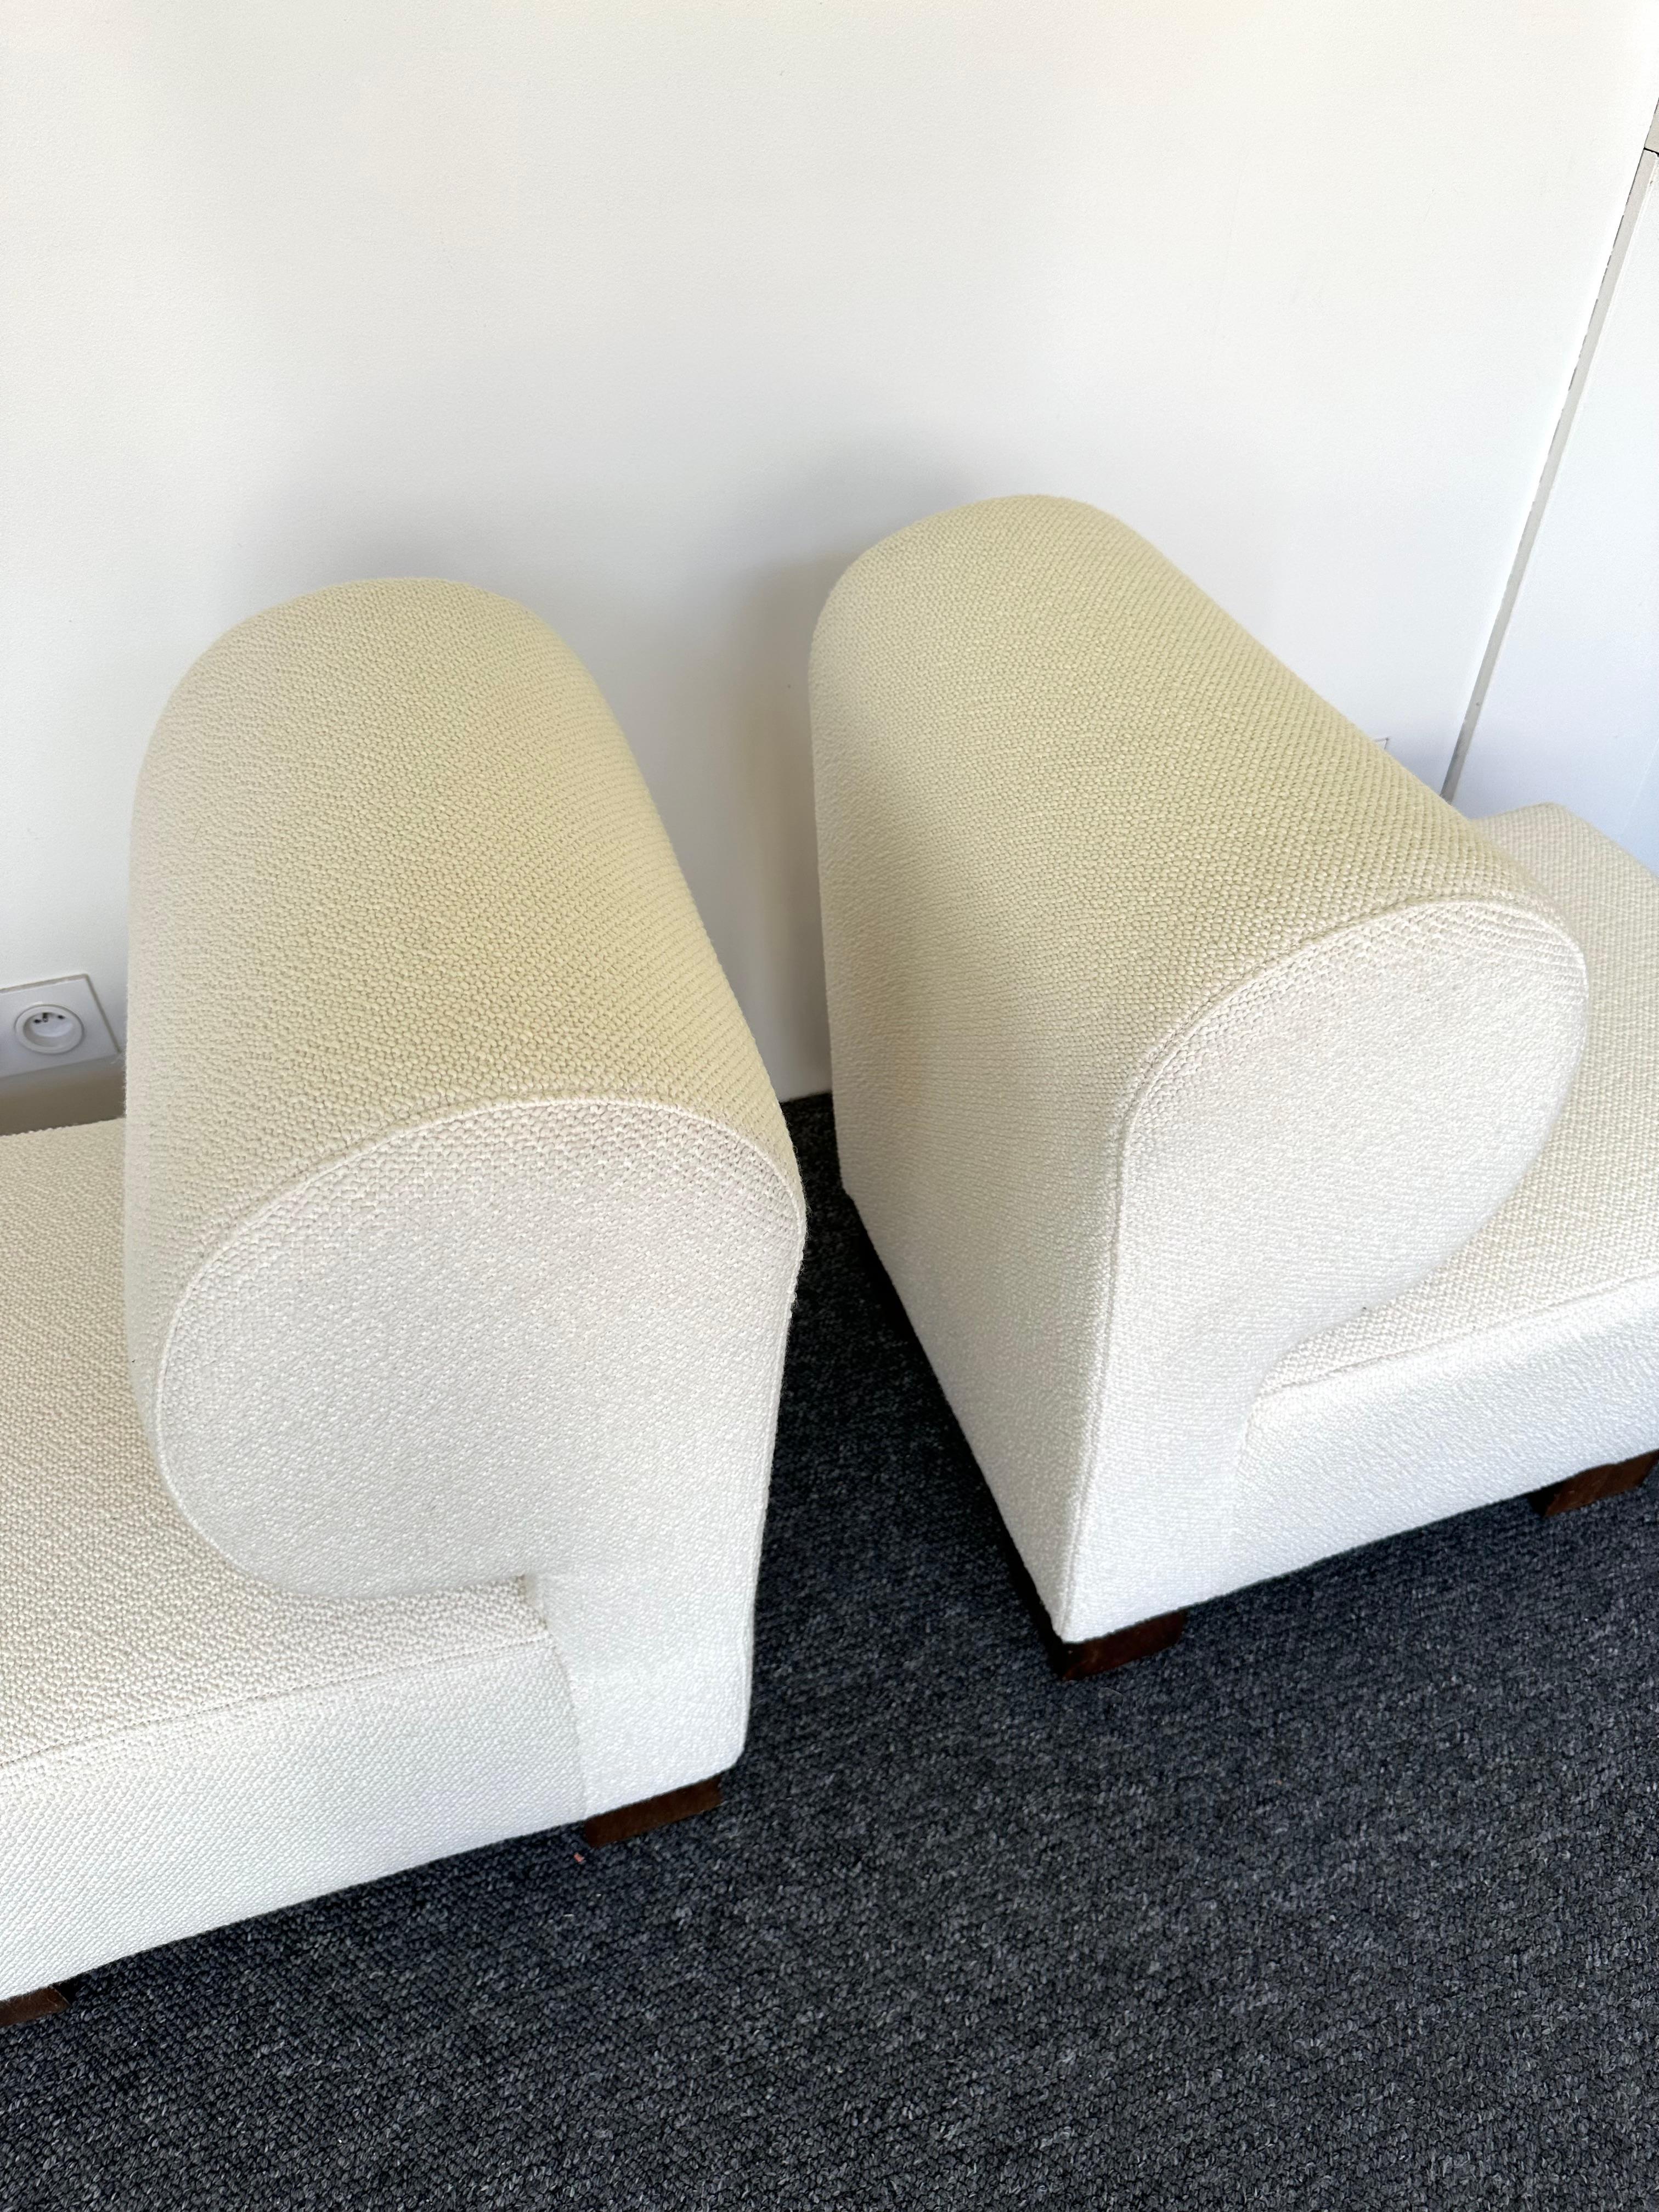 Pair of Slipper Chairs P, Italy, 1970s For Sale 2